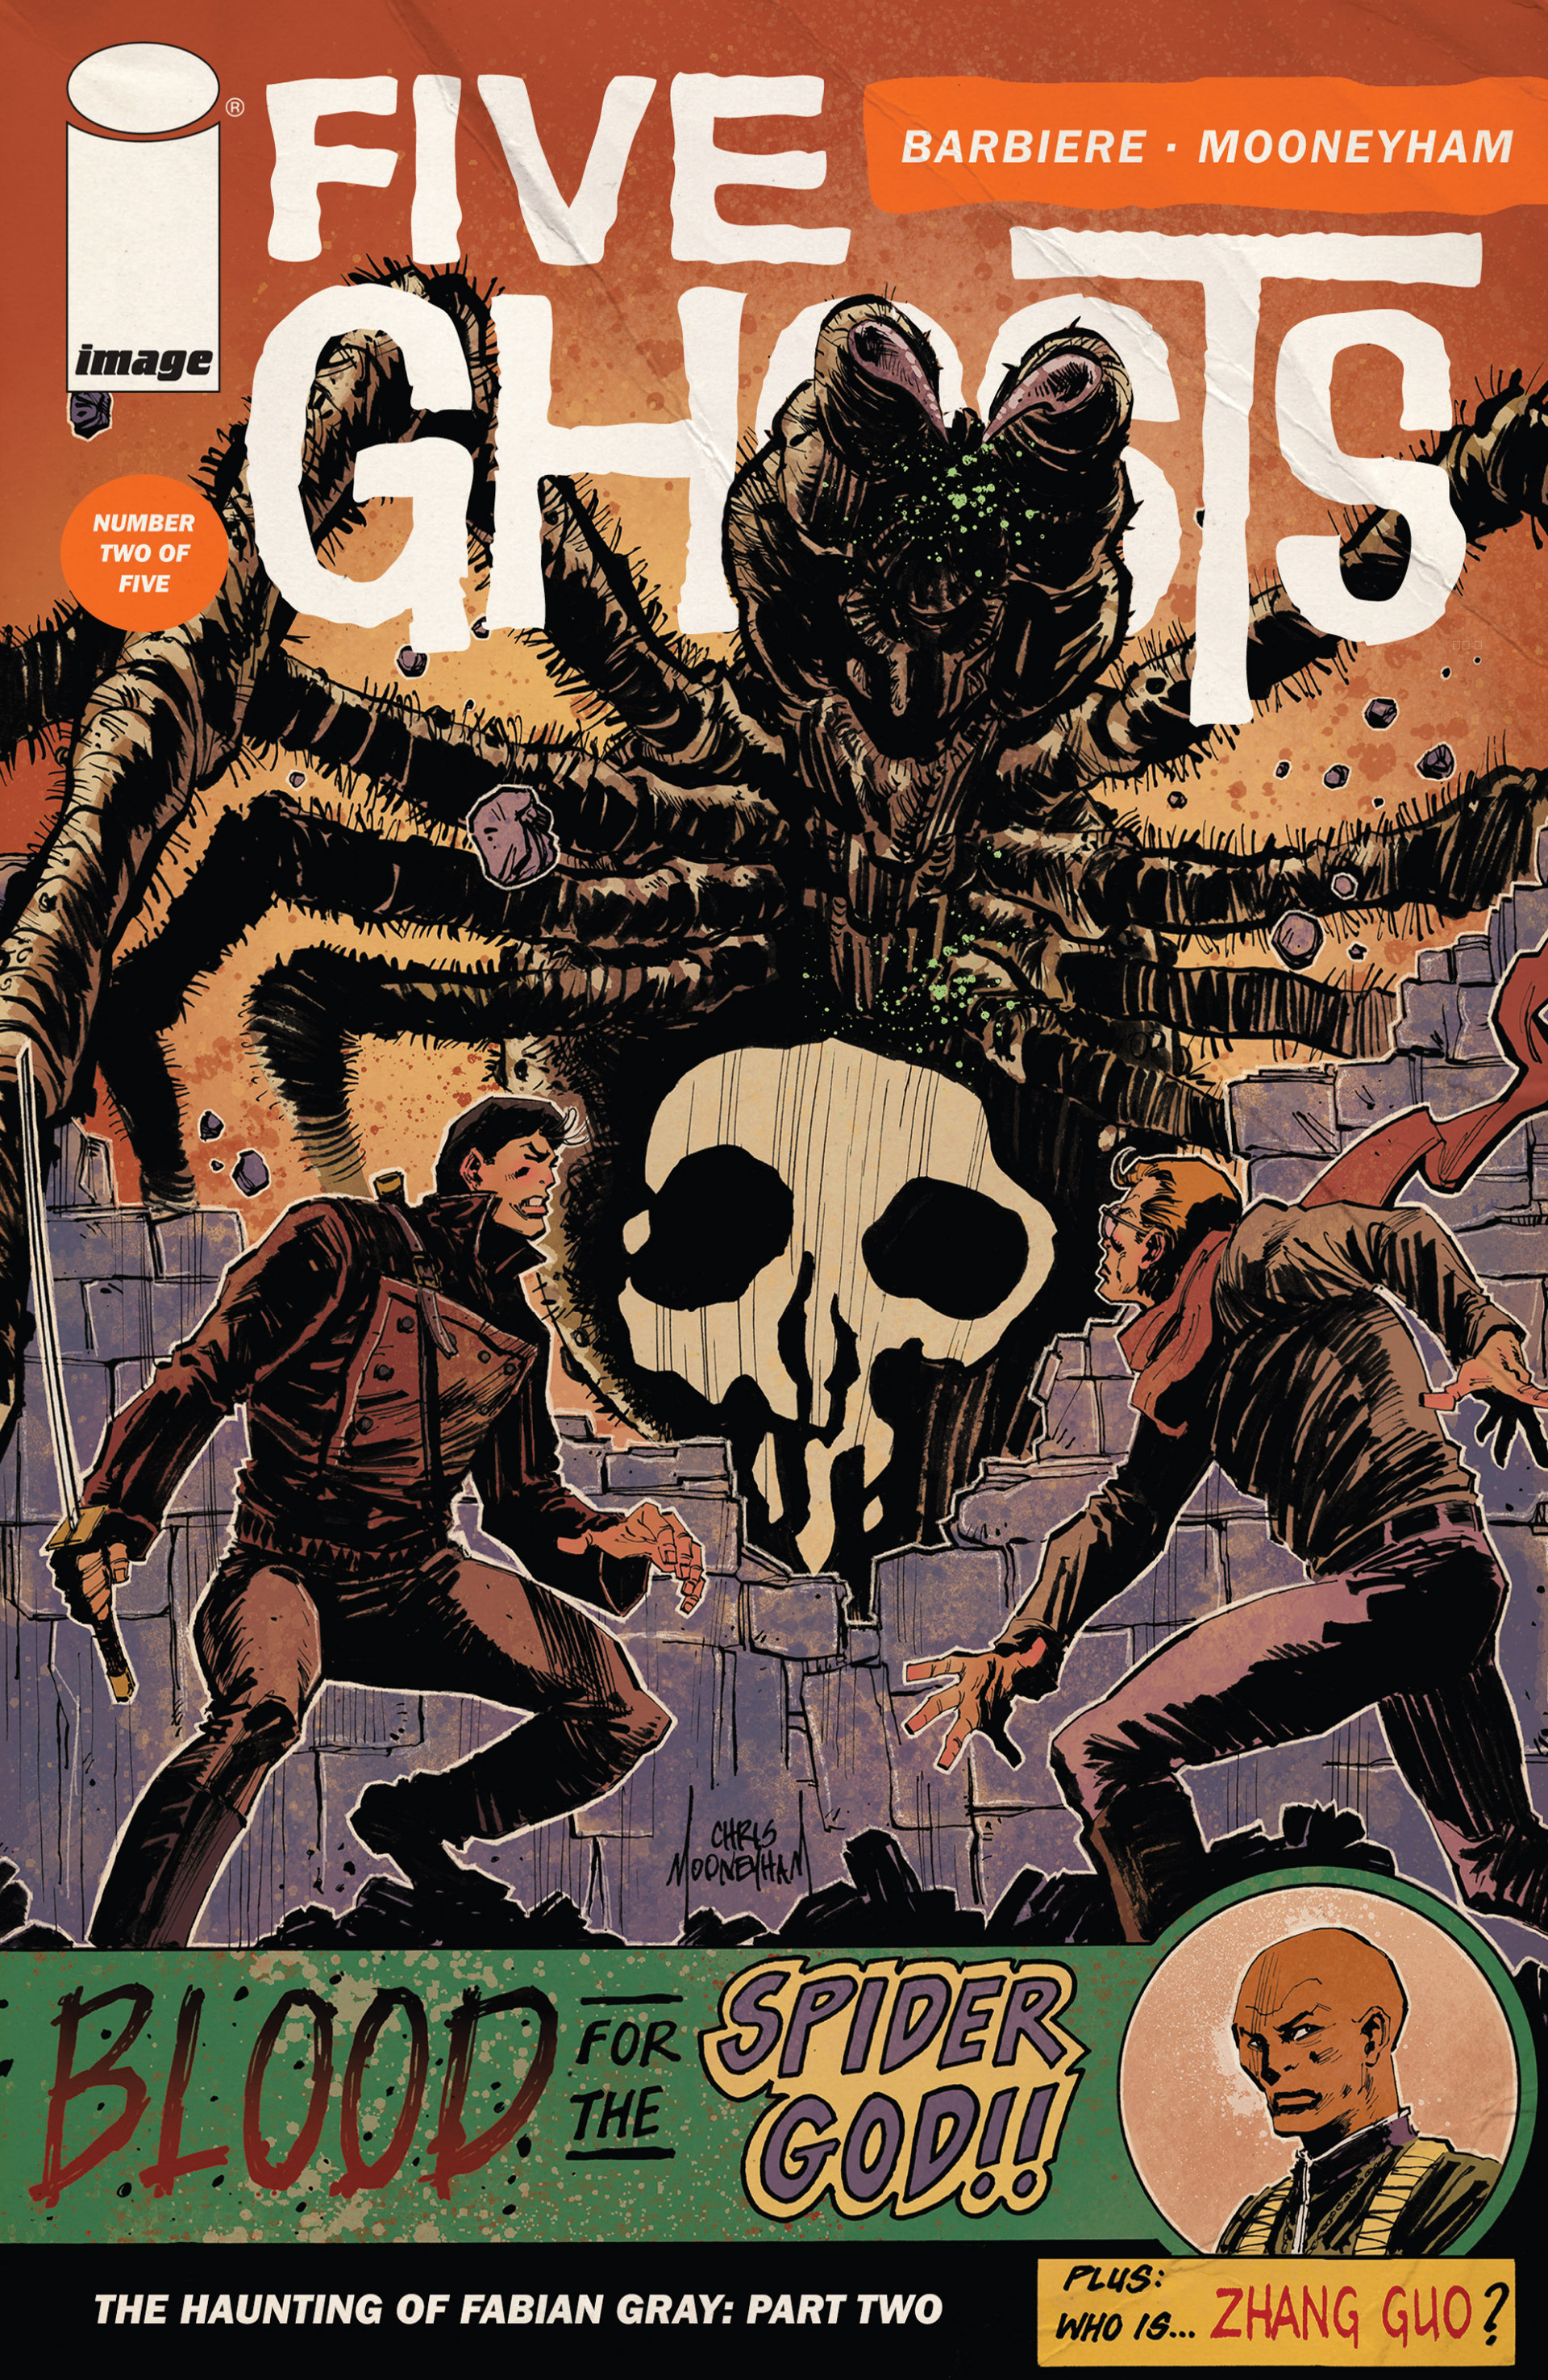 Read online Five Ghosts comic -  Issue #2 - 1